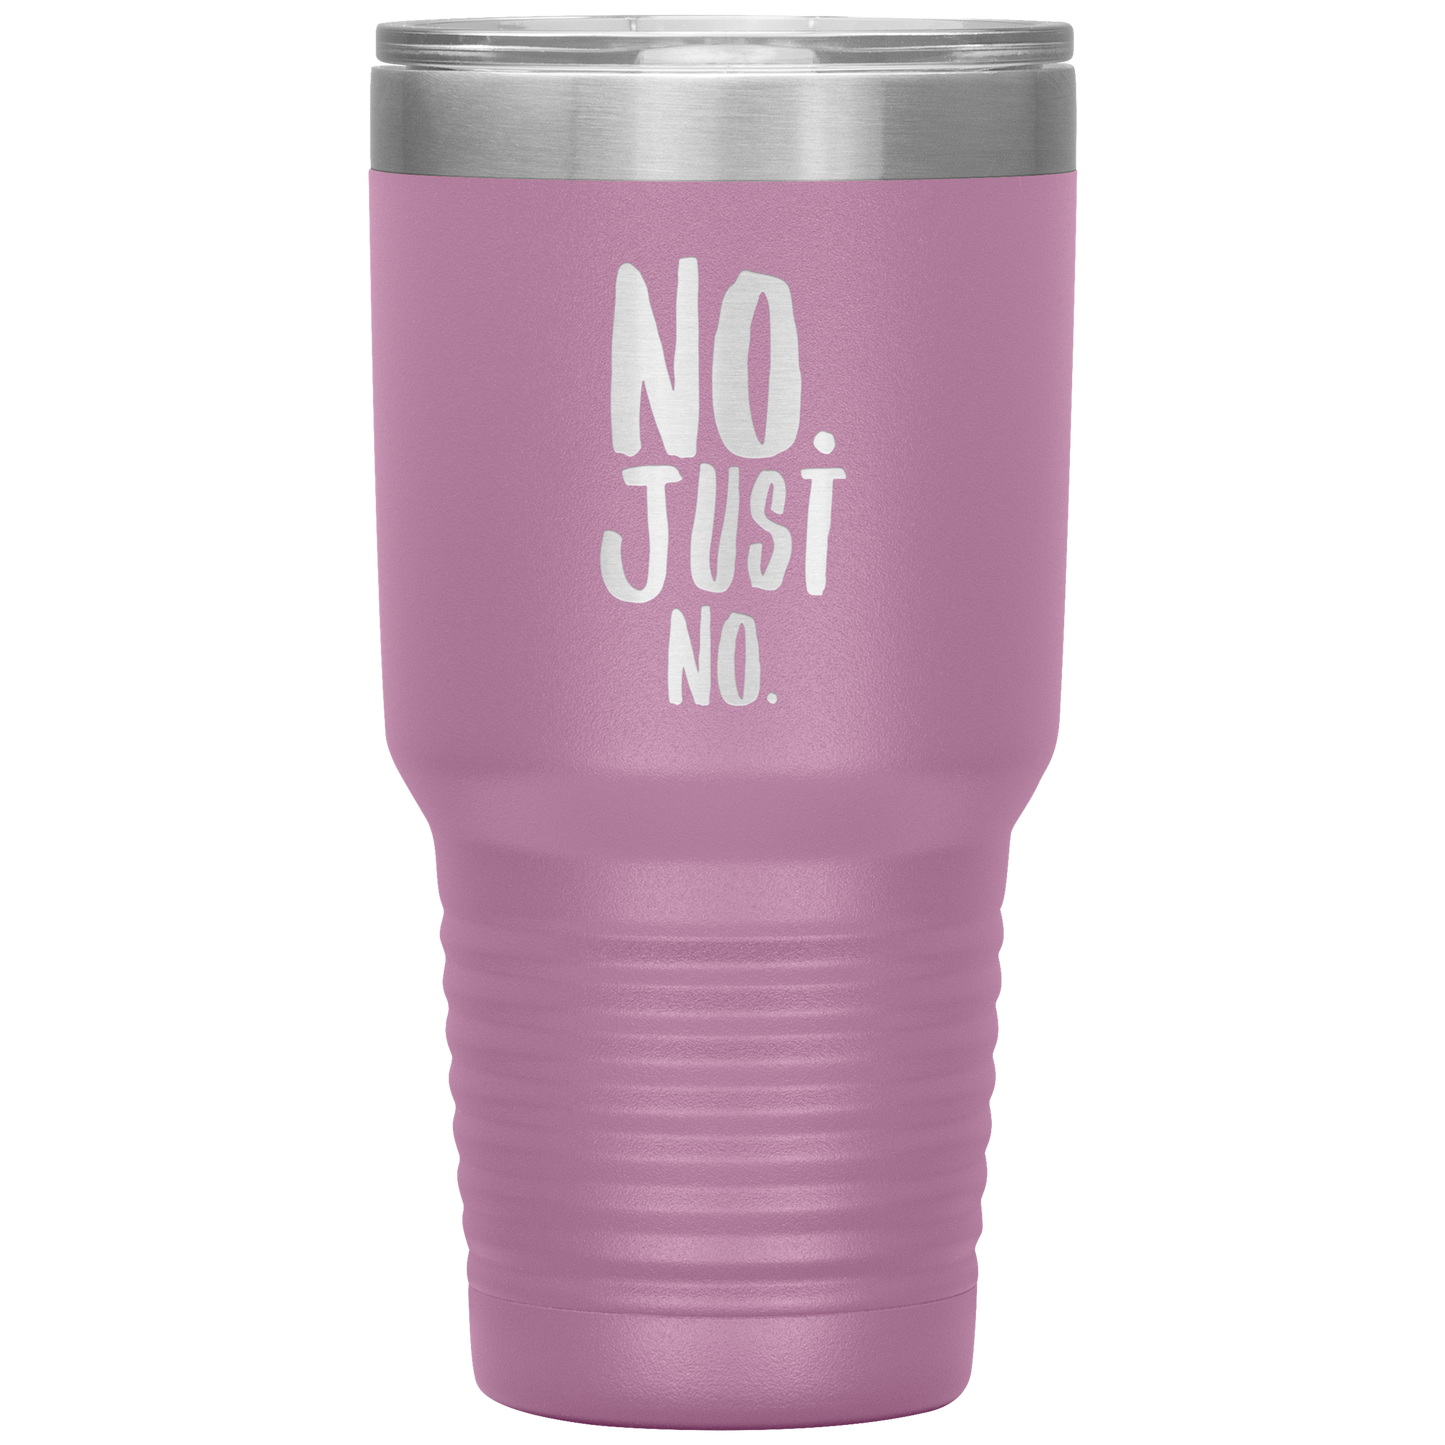 "No. Just No." 30 oz. Insulated Stainless Steel Insulated Travel Coffee Cup with Lid